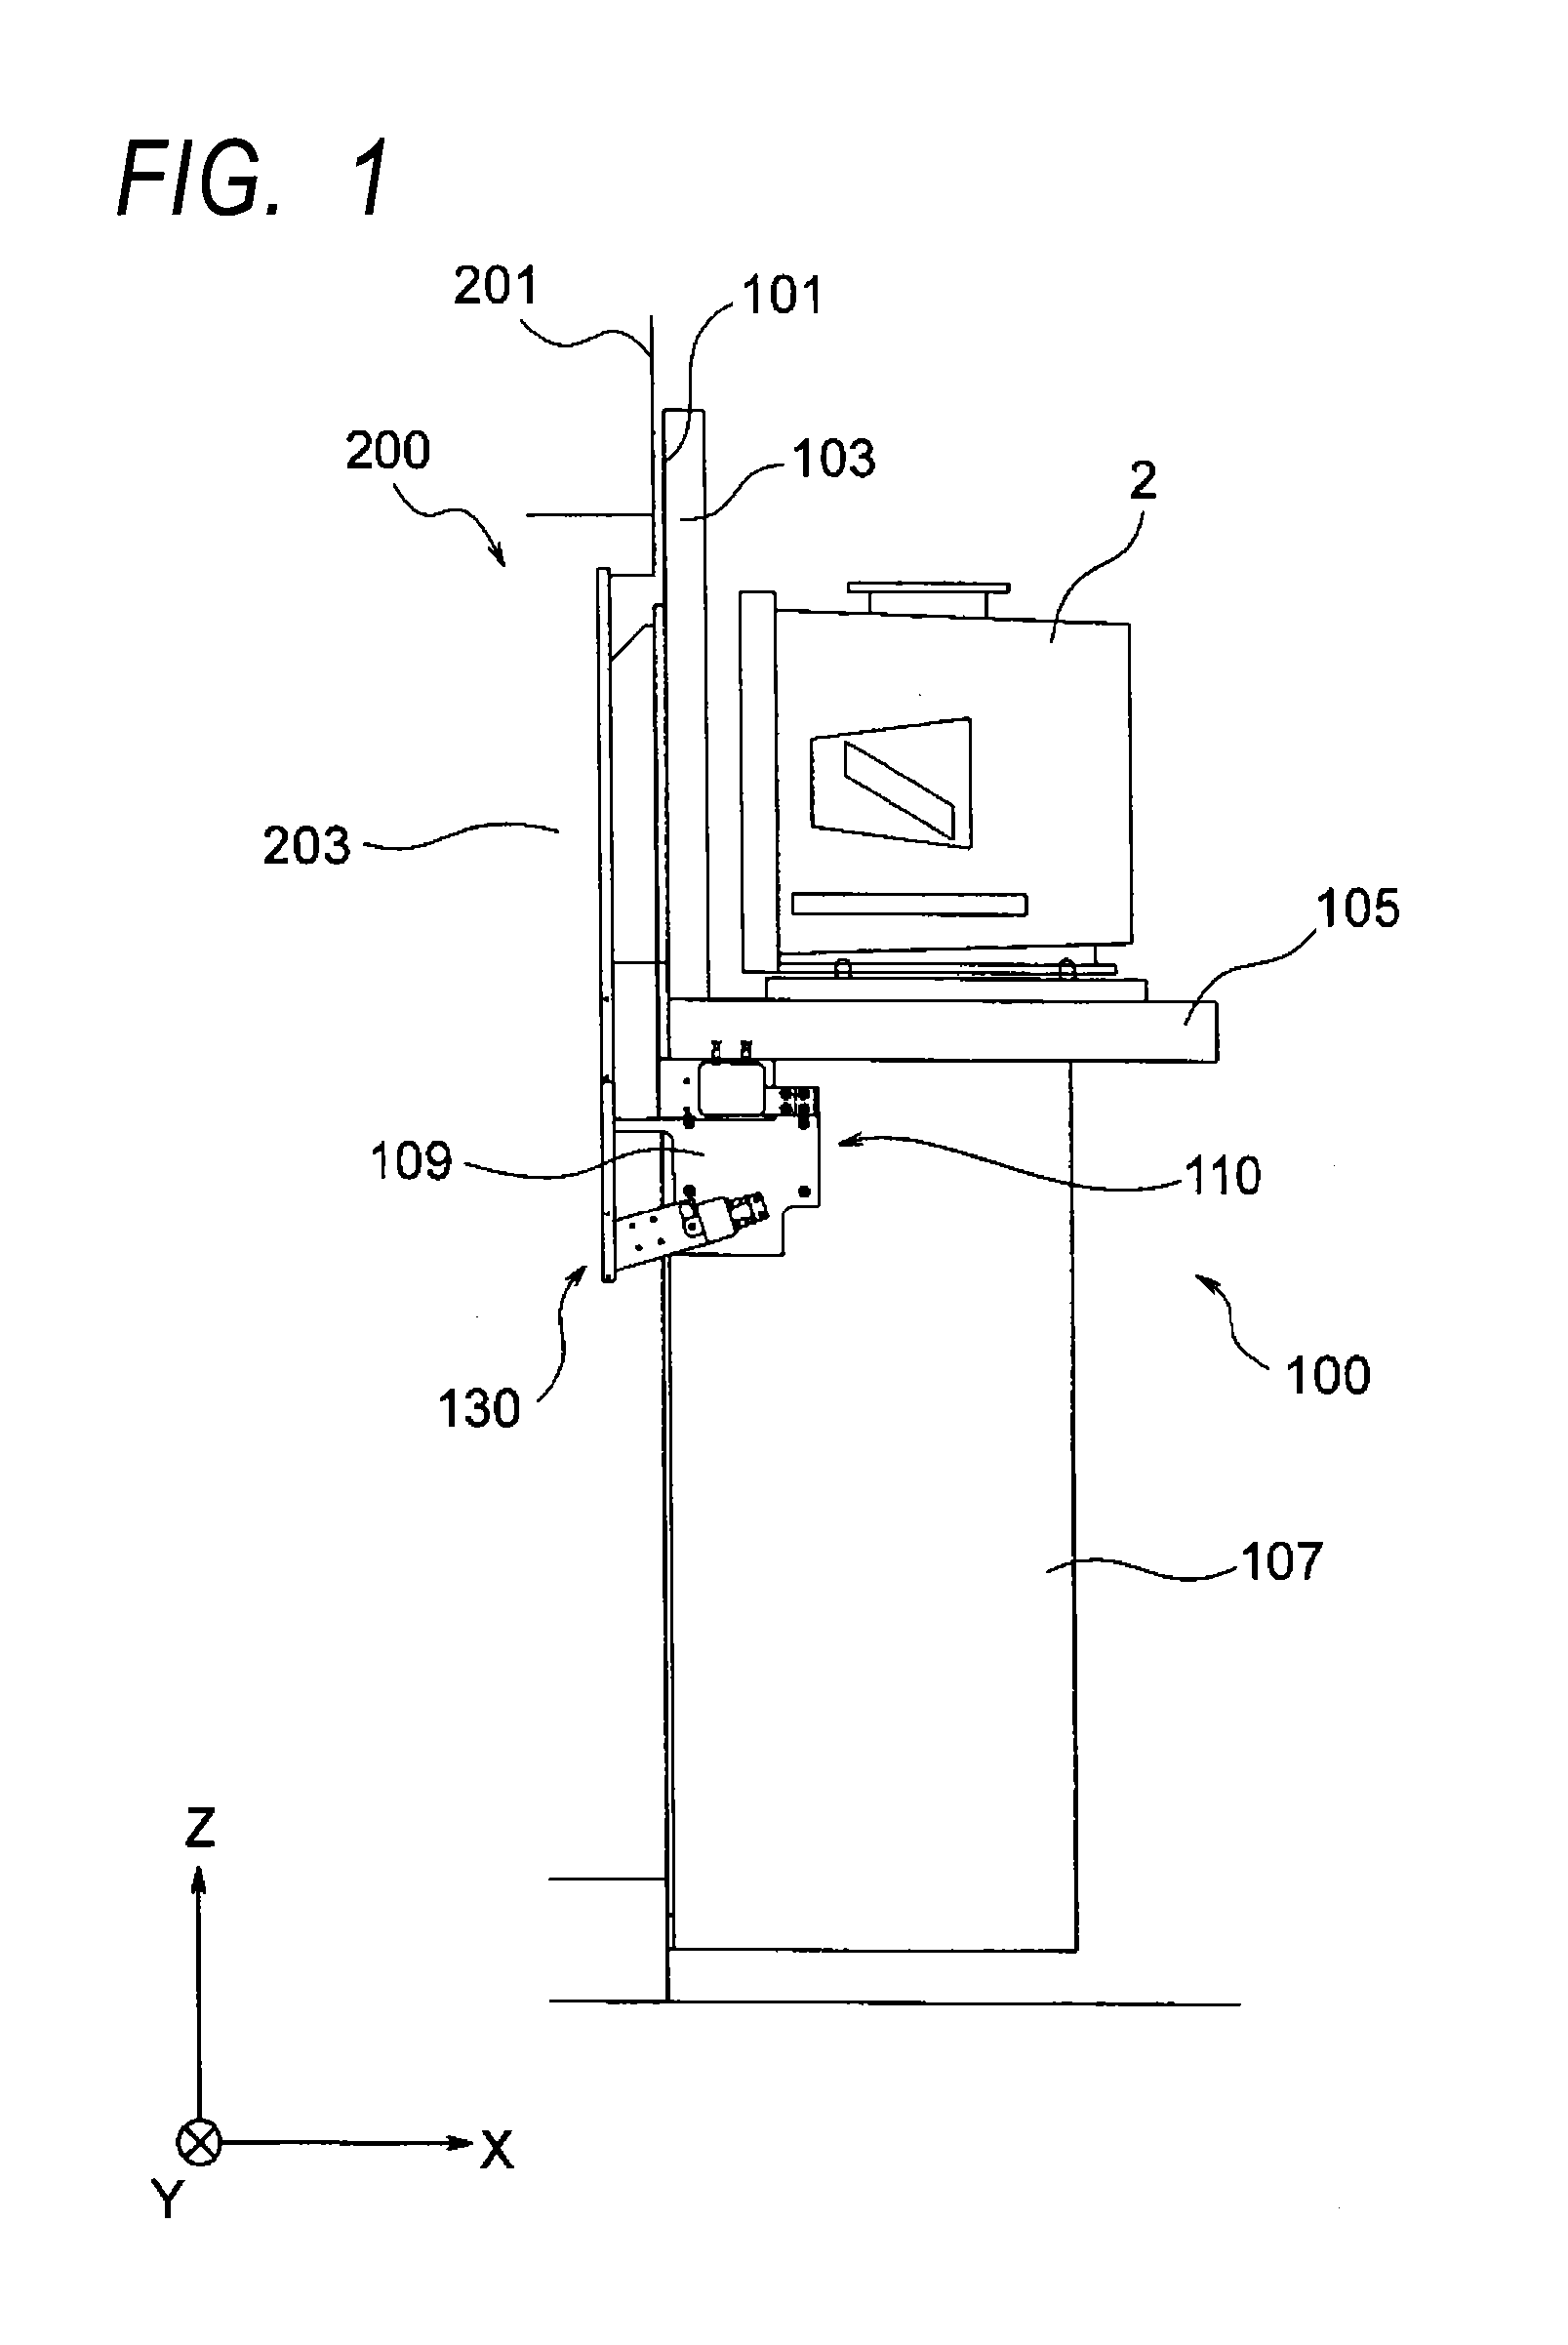 Load port apparatus and method of detecting object to be processed